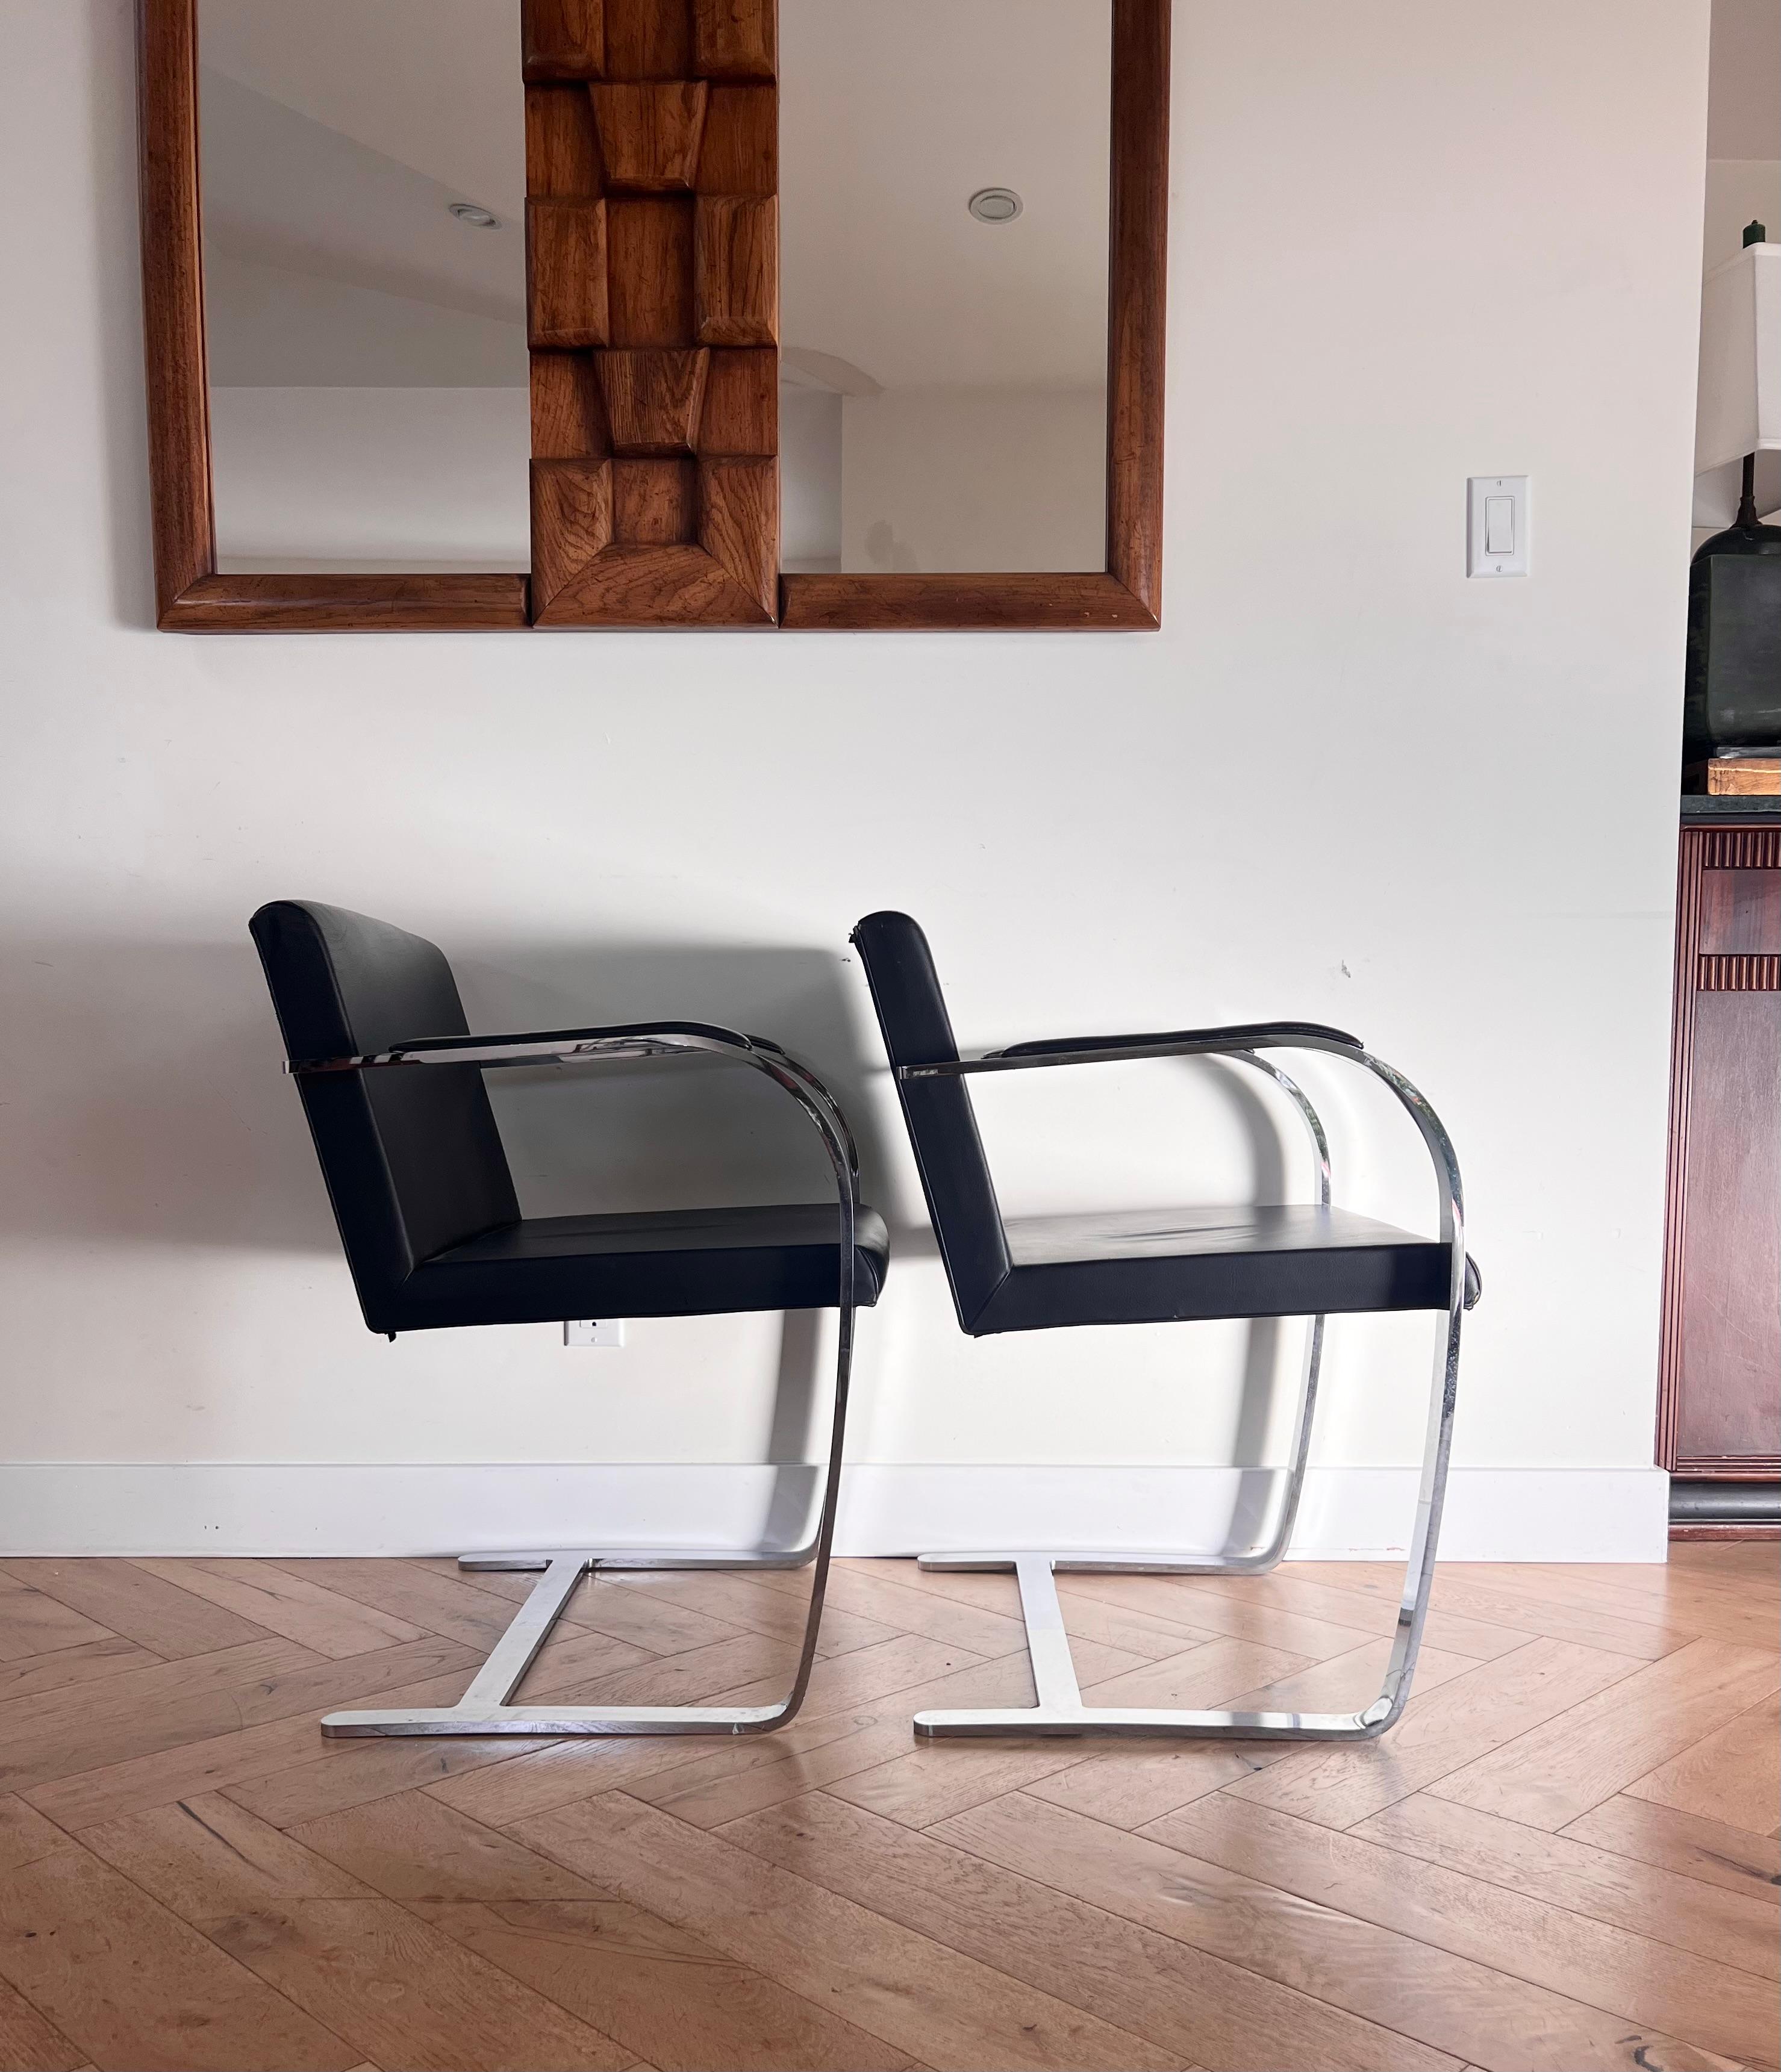 Pair of Mies van der Rohe Brno chairs by Palazzetti, 1970s For Sale 6